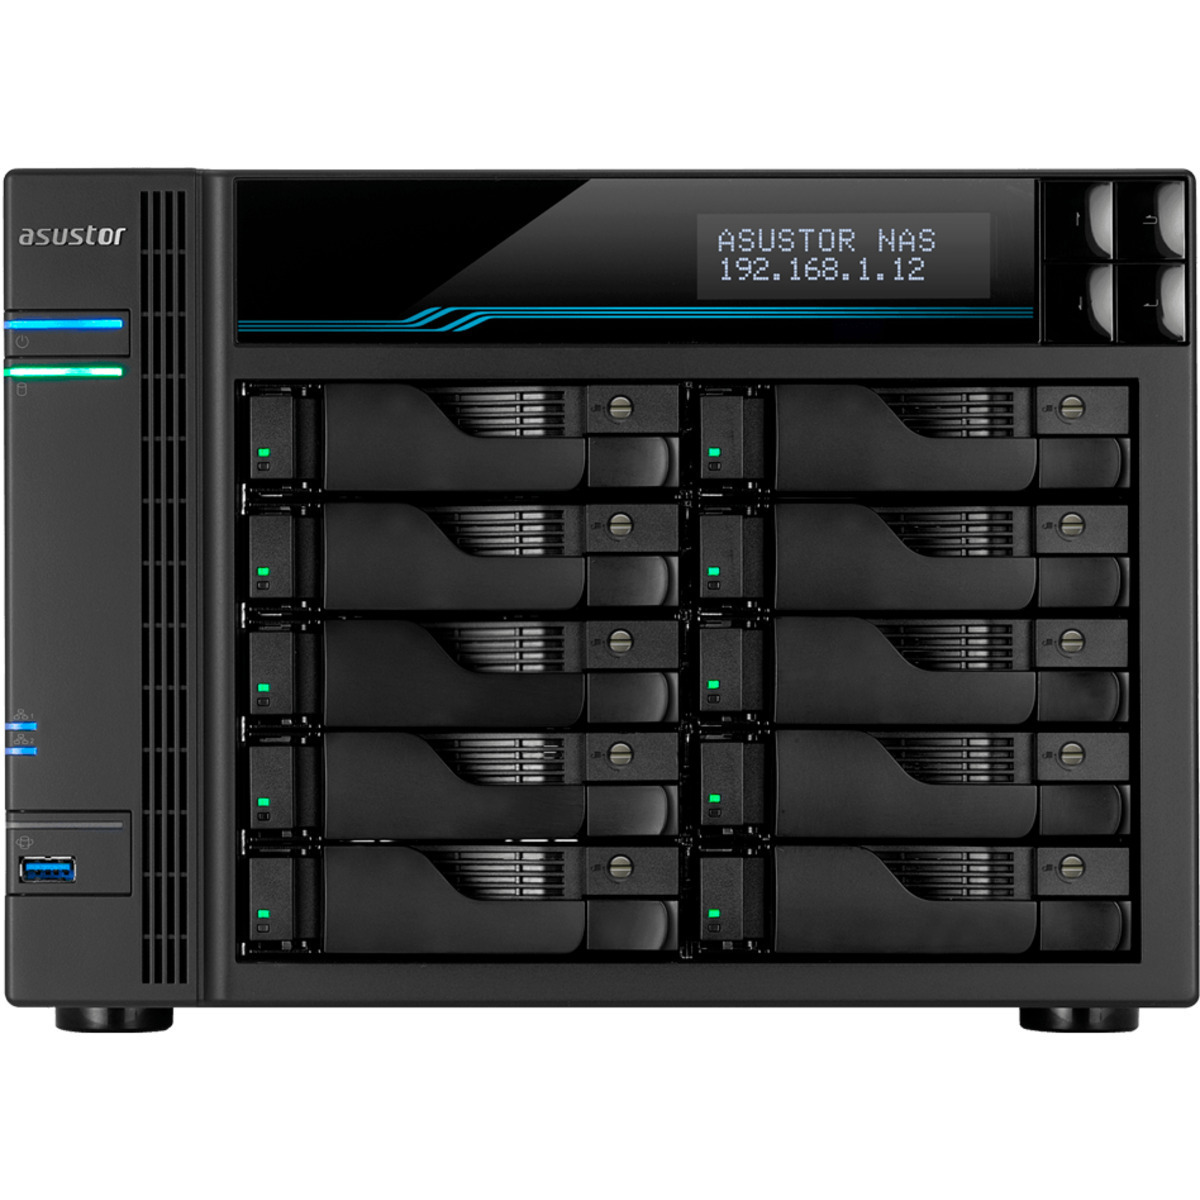 ASUSTOR AS6510T Lockerstor 10 160tb 10-Bay Desktop Multimedia / Power User / Business NAS - Network Attached Storage Device 10x16tb Seagate IronWolf Pro ST16000NT001 3.5 7200rpm SATA 6Gb/s HDD NAS Class Drives Installed - Burn-In Tested - ON SALE - FREE RAM UPGRADE AS6510T Lockerstor 10